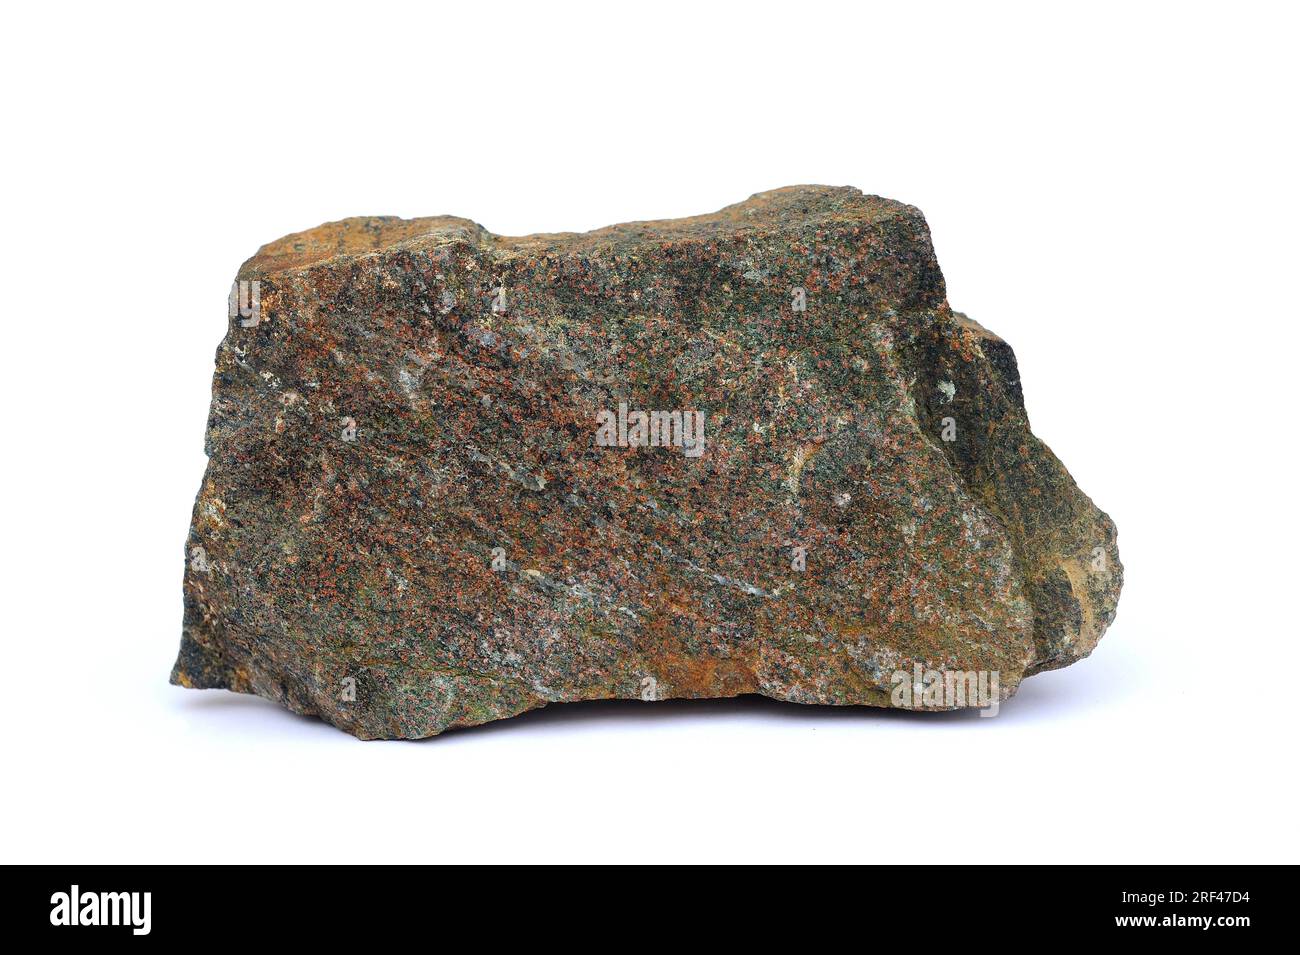 Eclogite is a metamorphic rock; is formed by metamorphism of gabbro or basalt. This sample comes from Cabo Ortegal, La Coruña, Galicia, Spain. Stock Photo